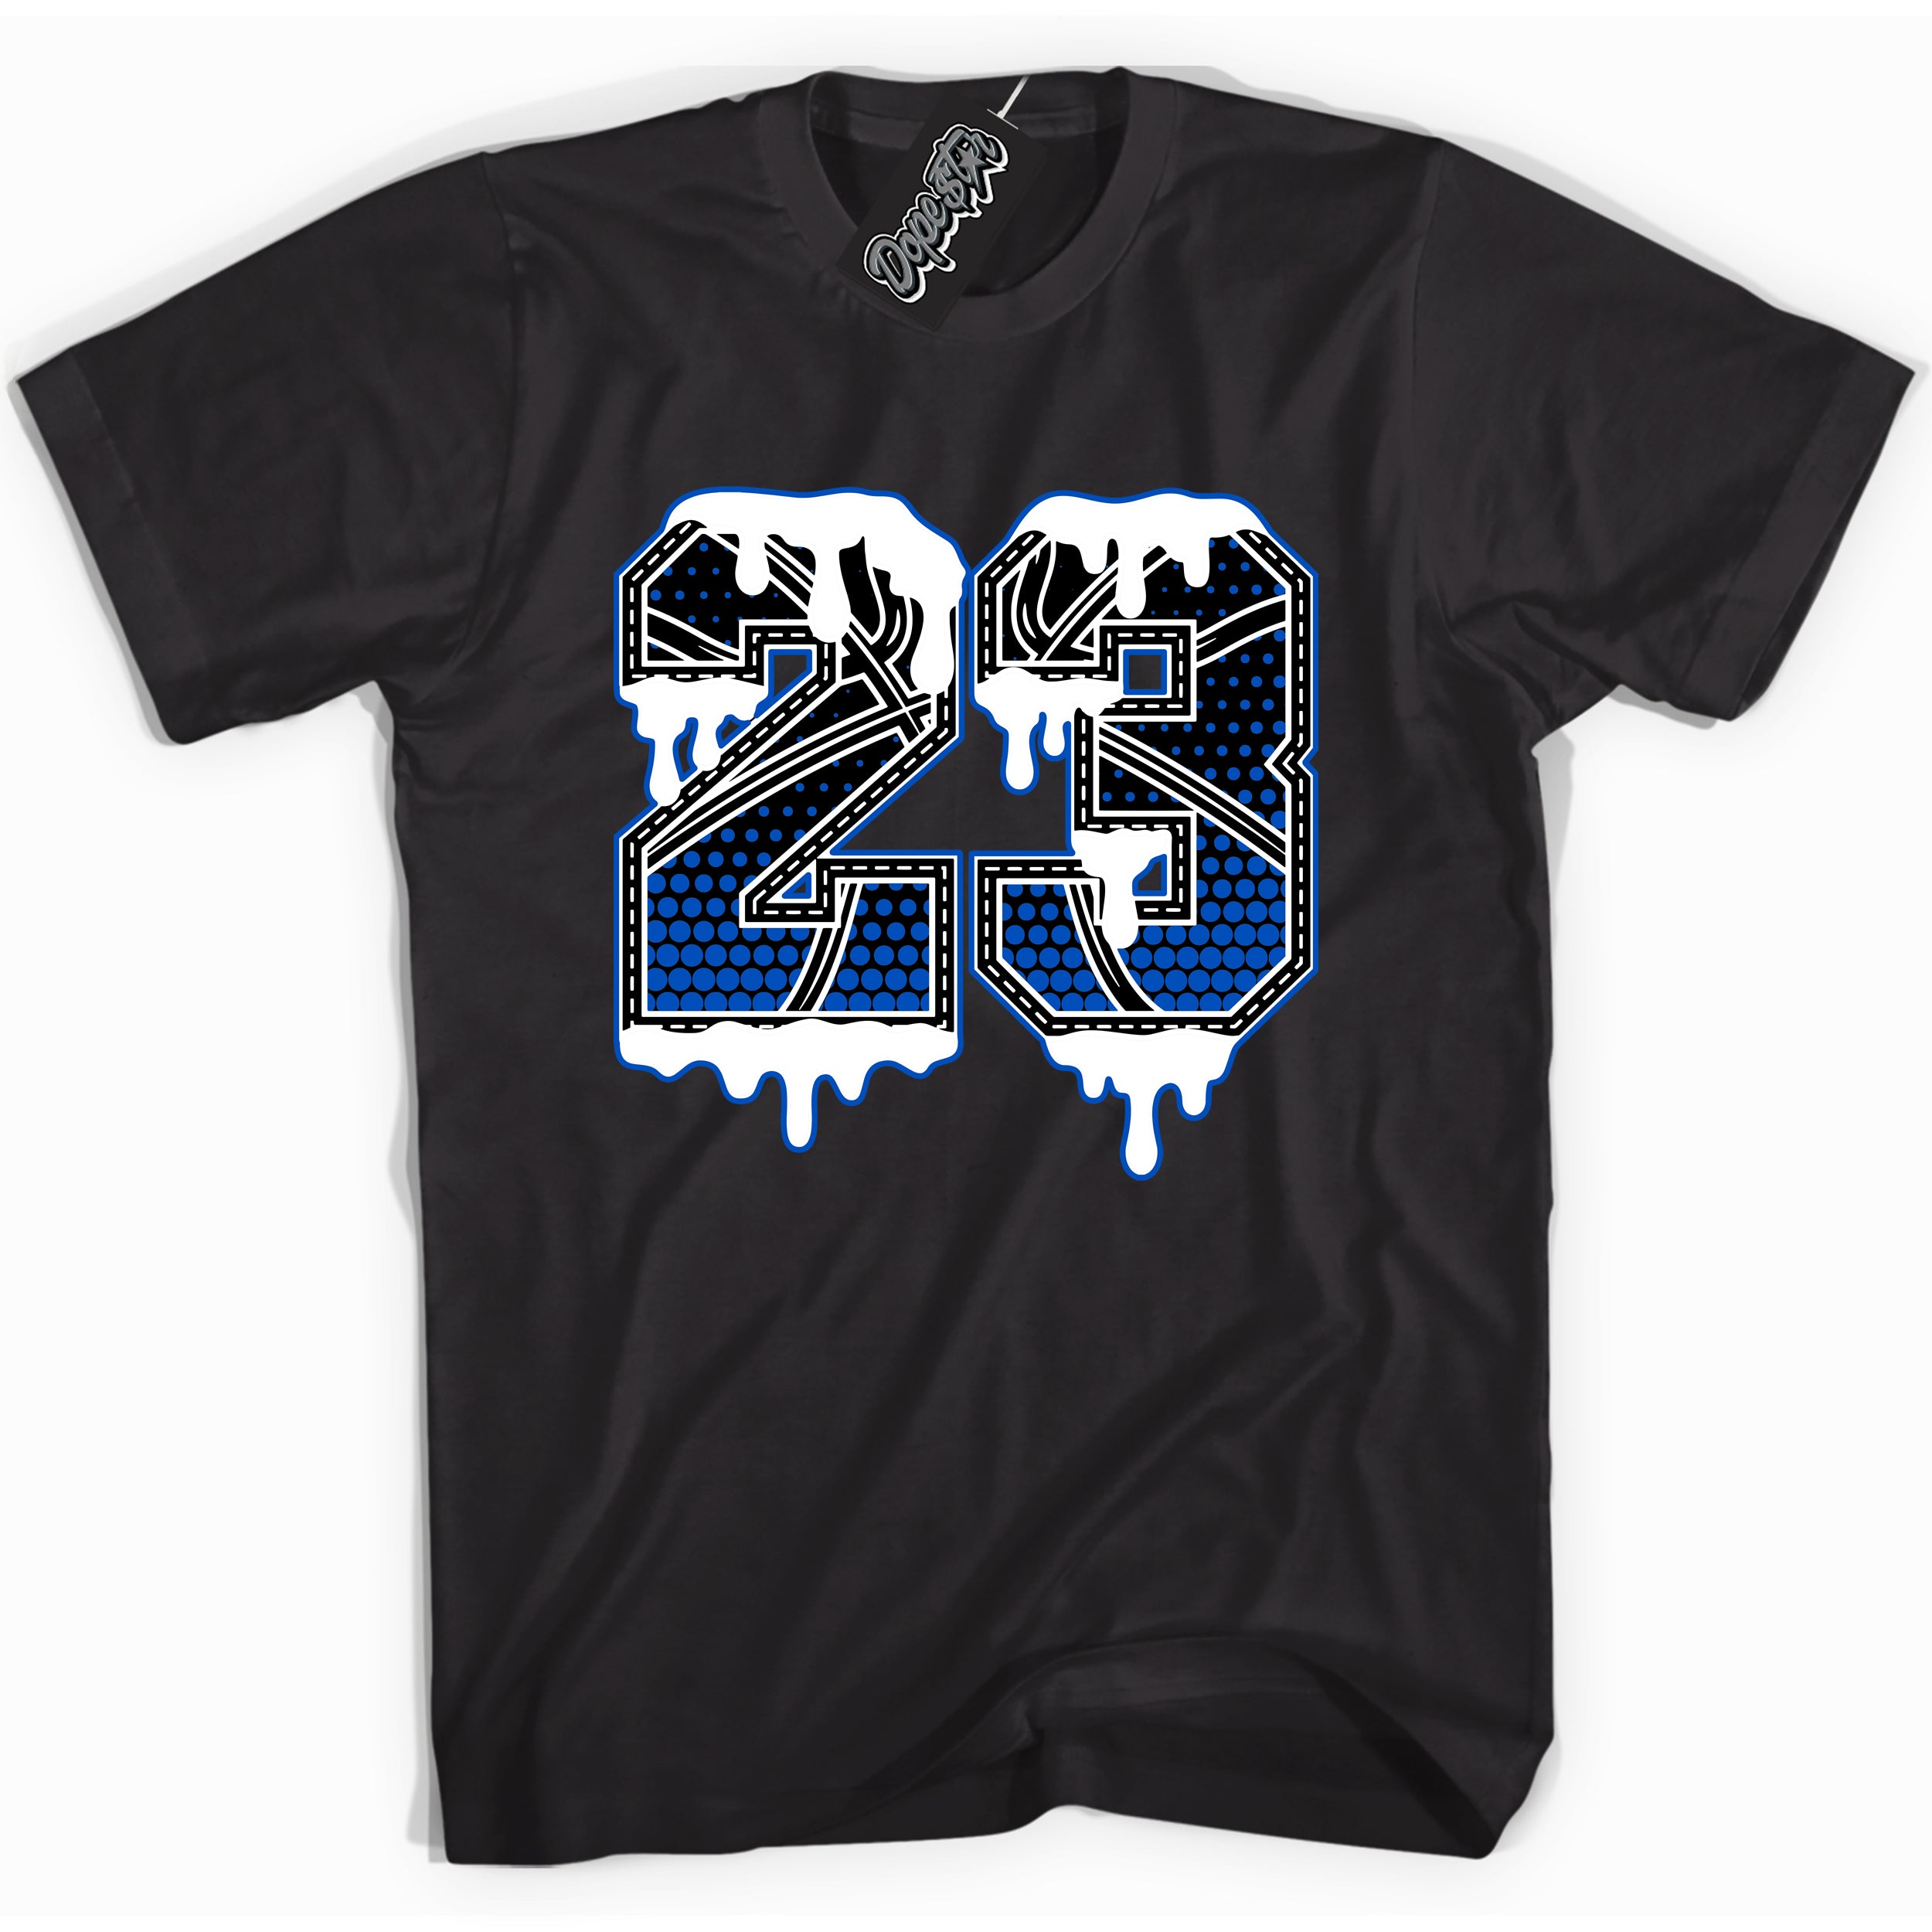 Cool Black graphic tee with "23 Ball" design, that perfectly matches Royal Reimagined 1s sneakers 